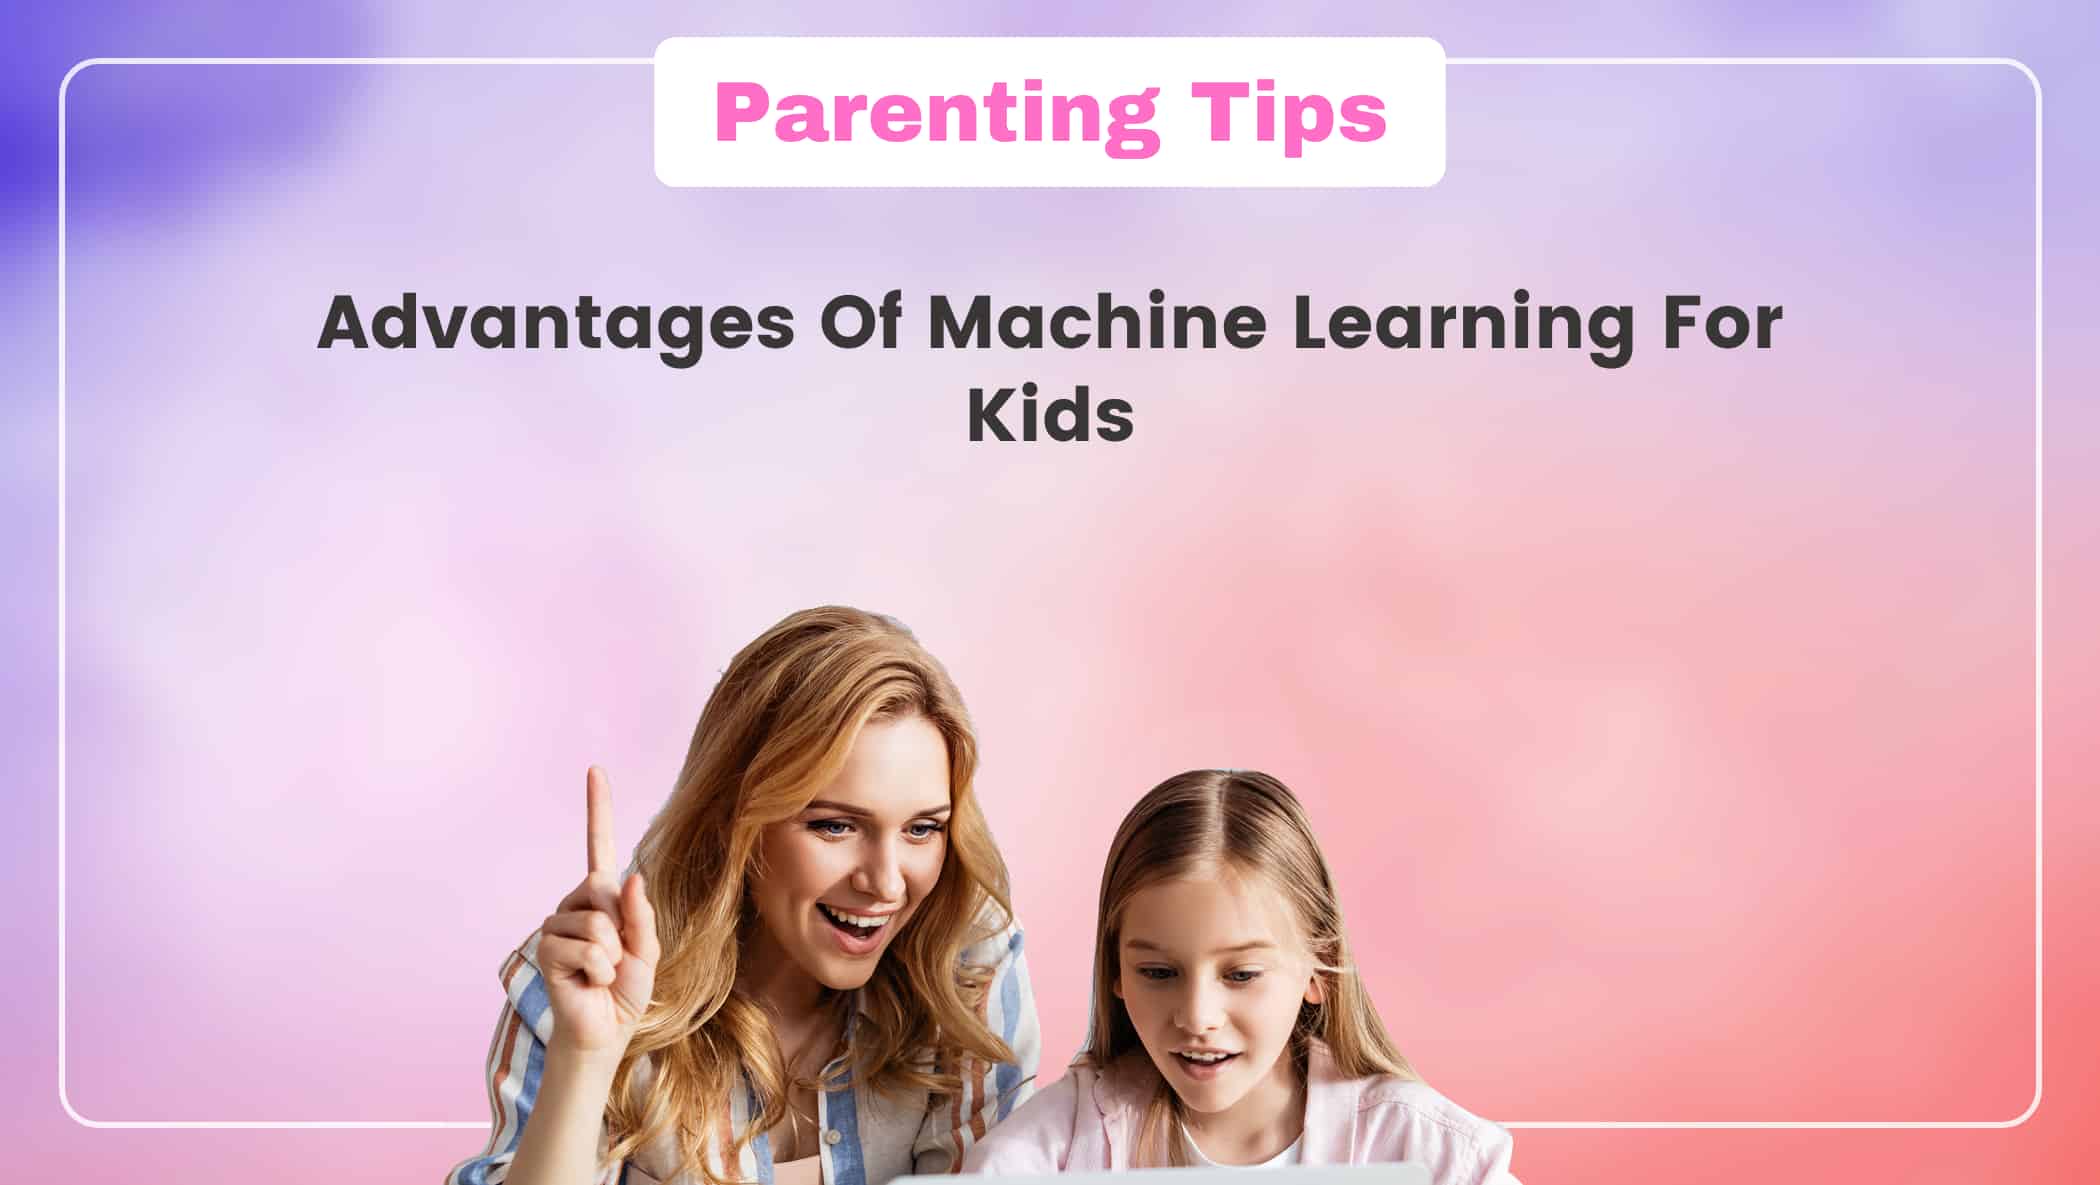 Advantages Of Machine Learning For Kids Image